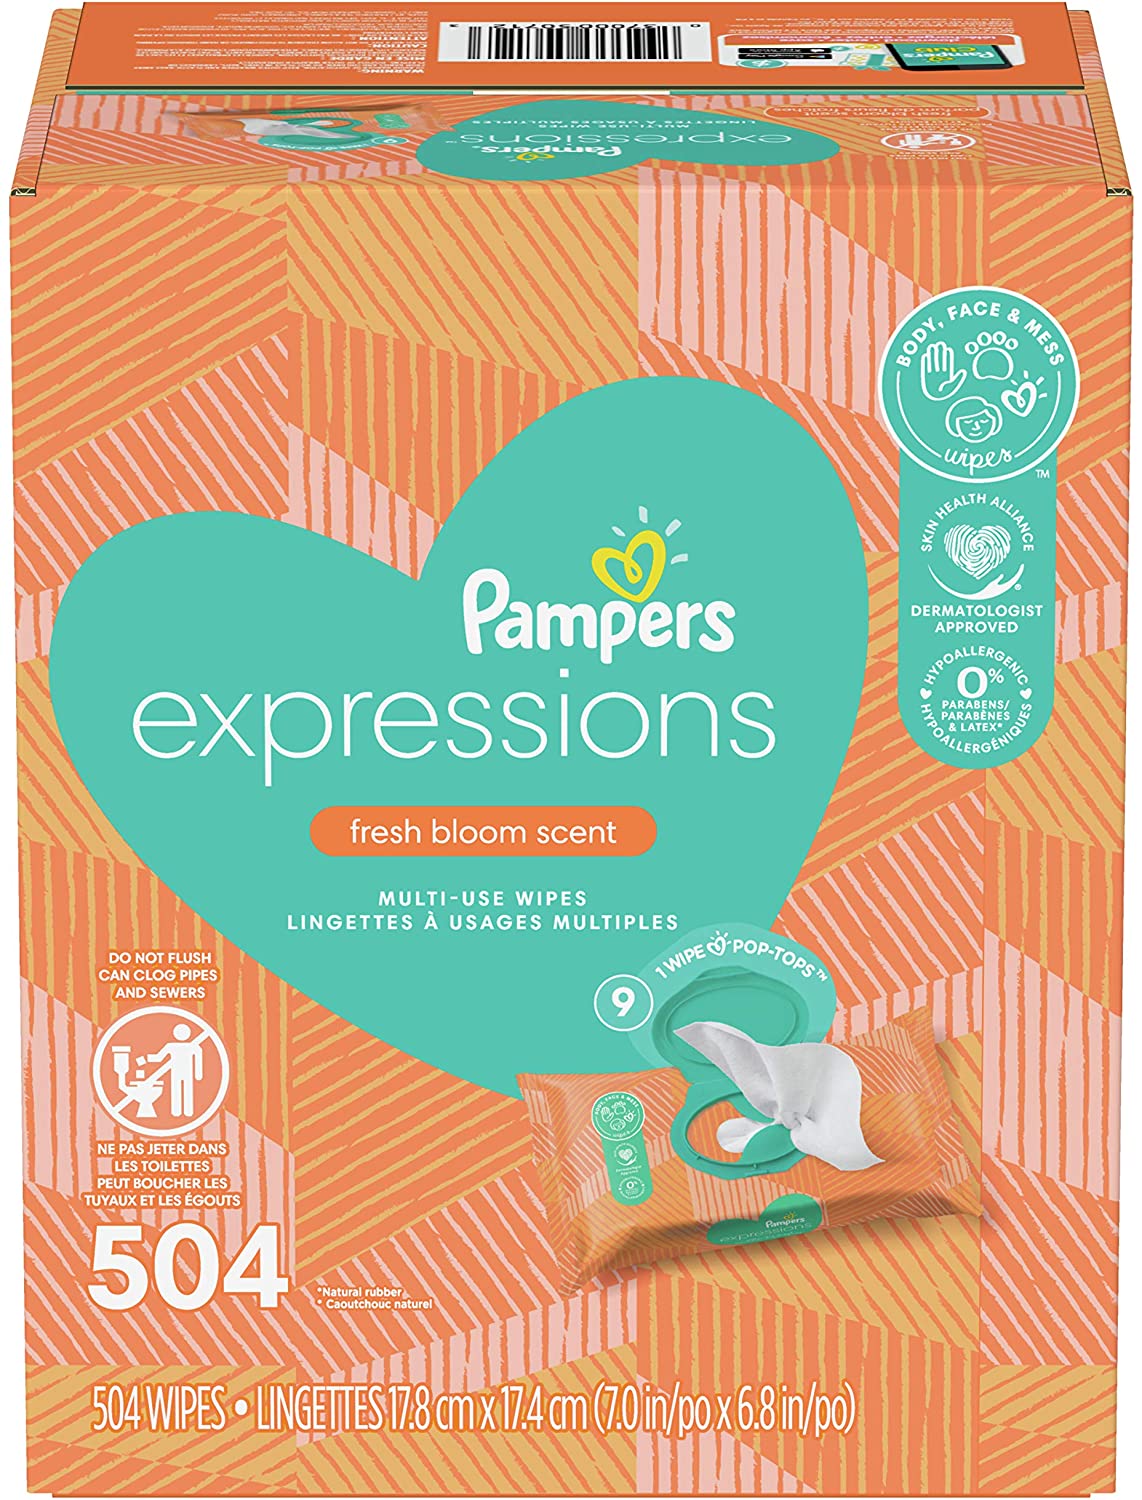 DEAD* 504 Count (9x Pop-Top Packs) Pampers Expressions Baby Diaper Wipes (Fresh Bloom) $5.97 @ Amazon w/ Prime or Walmart